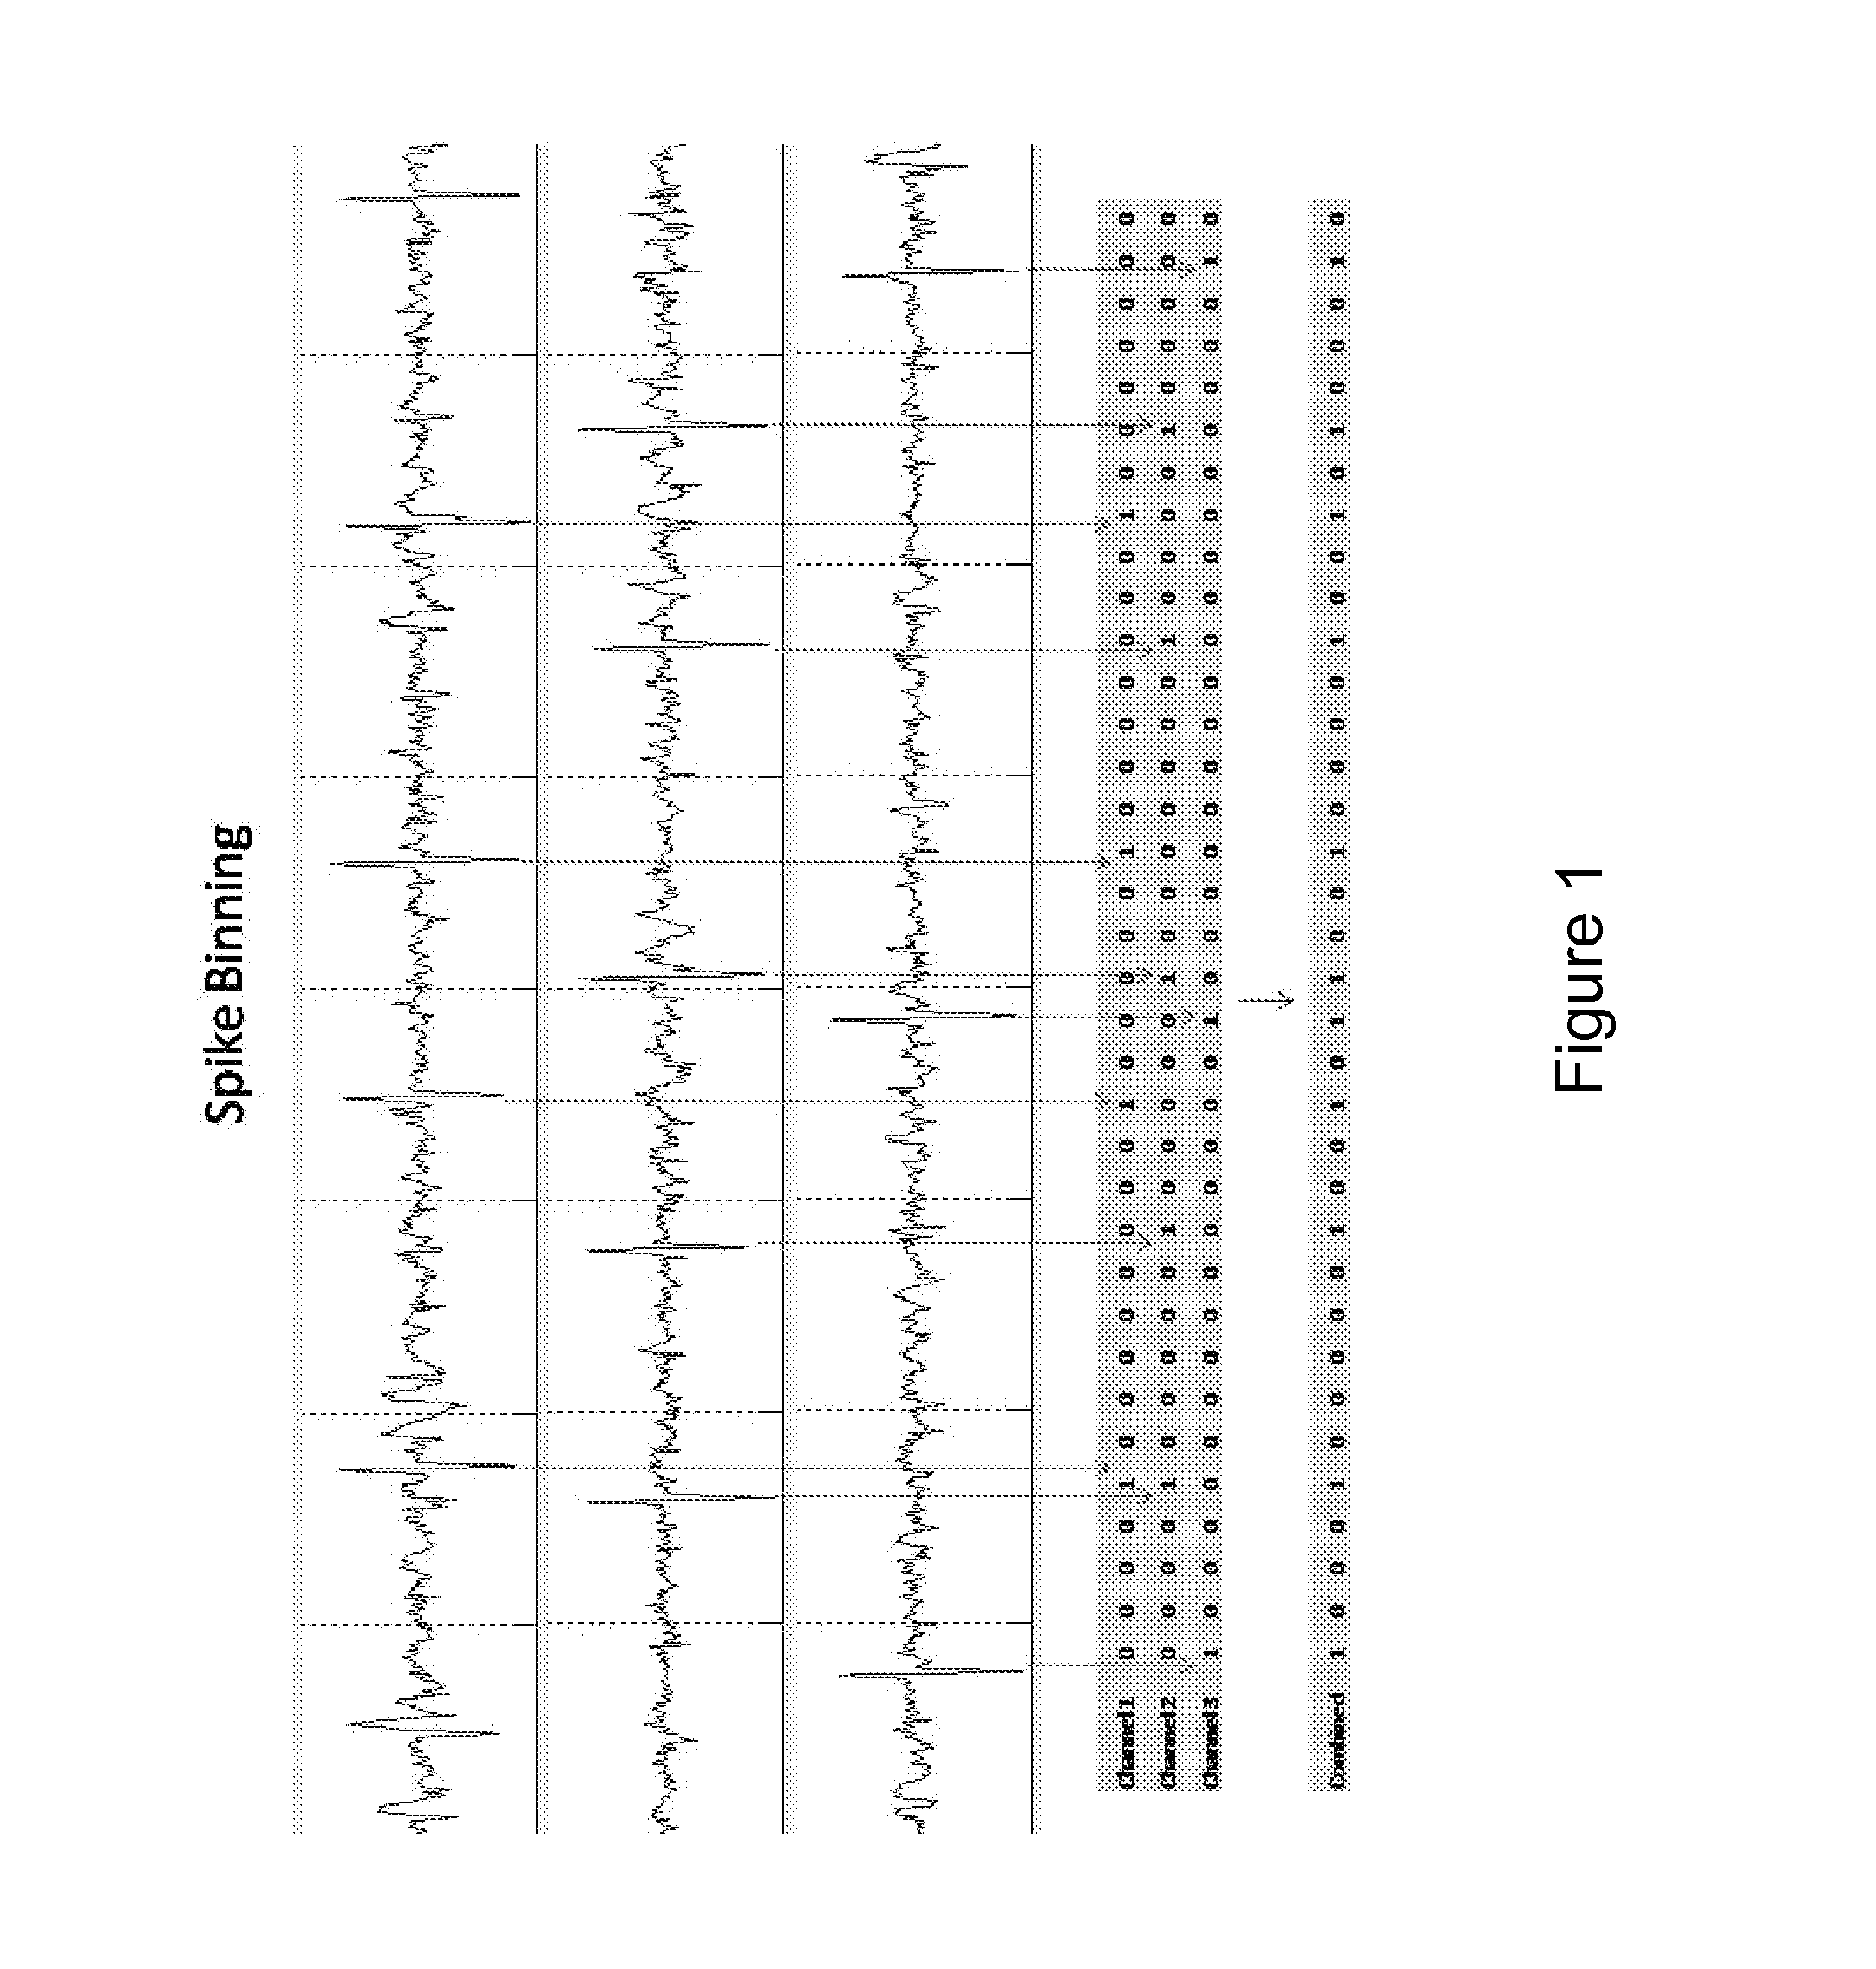 System and method of detecting and predicting seizures